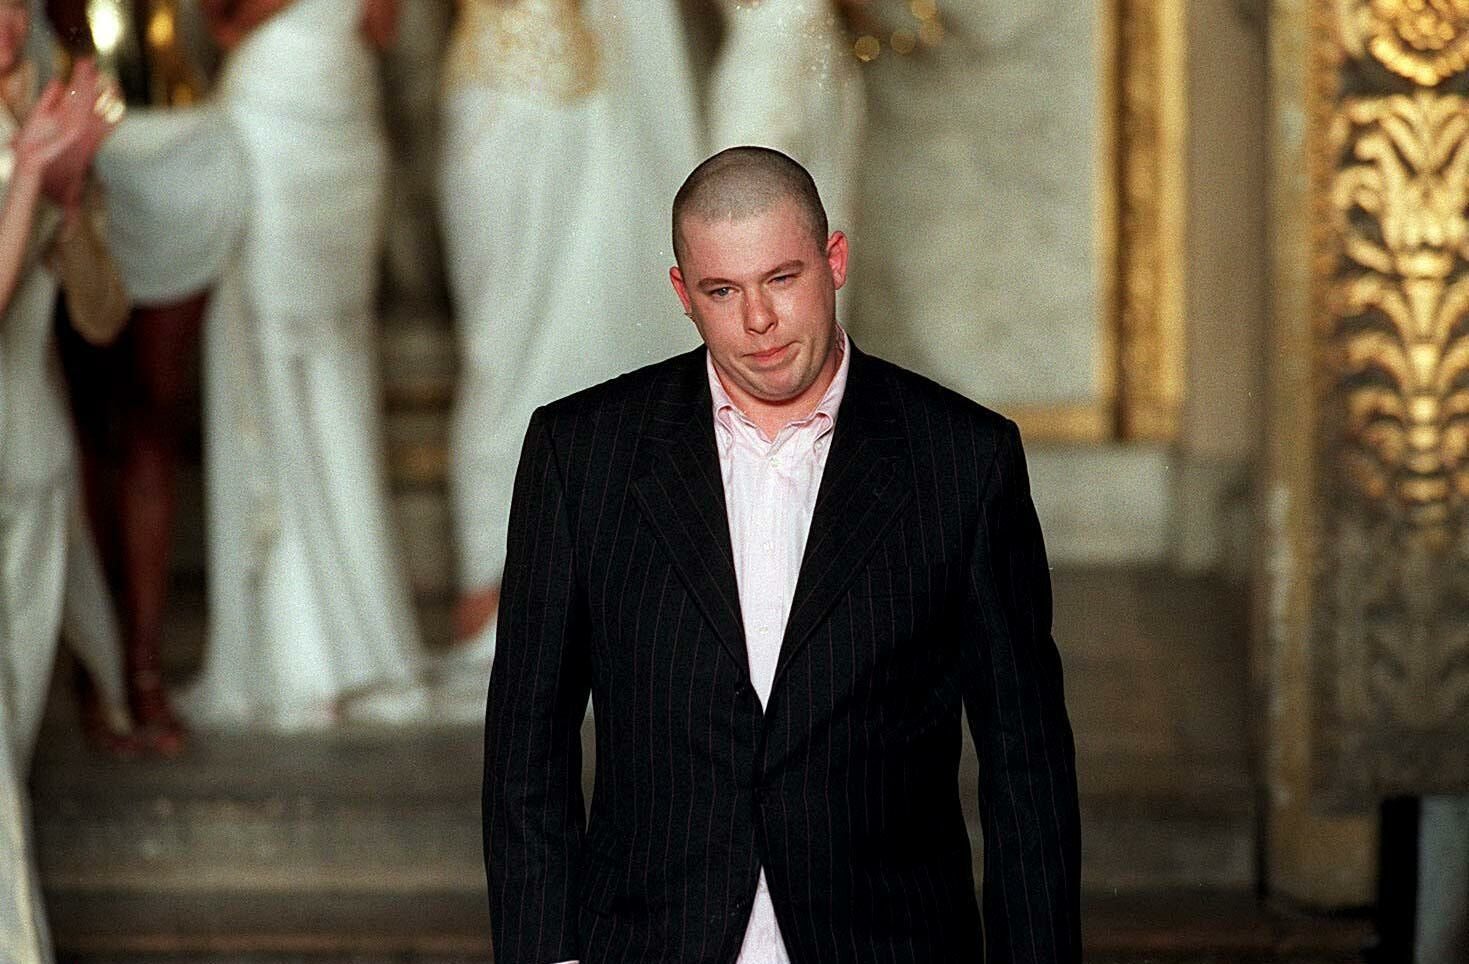 Lee McQueen was one of many examples of working-class creatives who set the cultural agenda in the 1990s